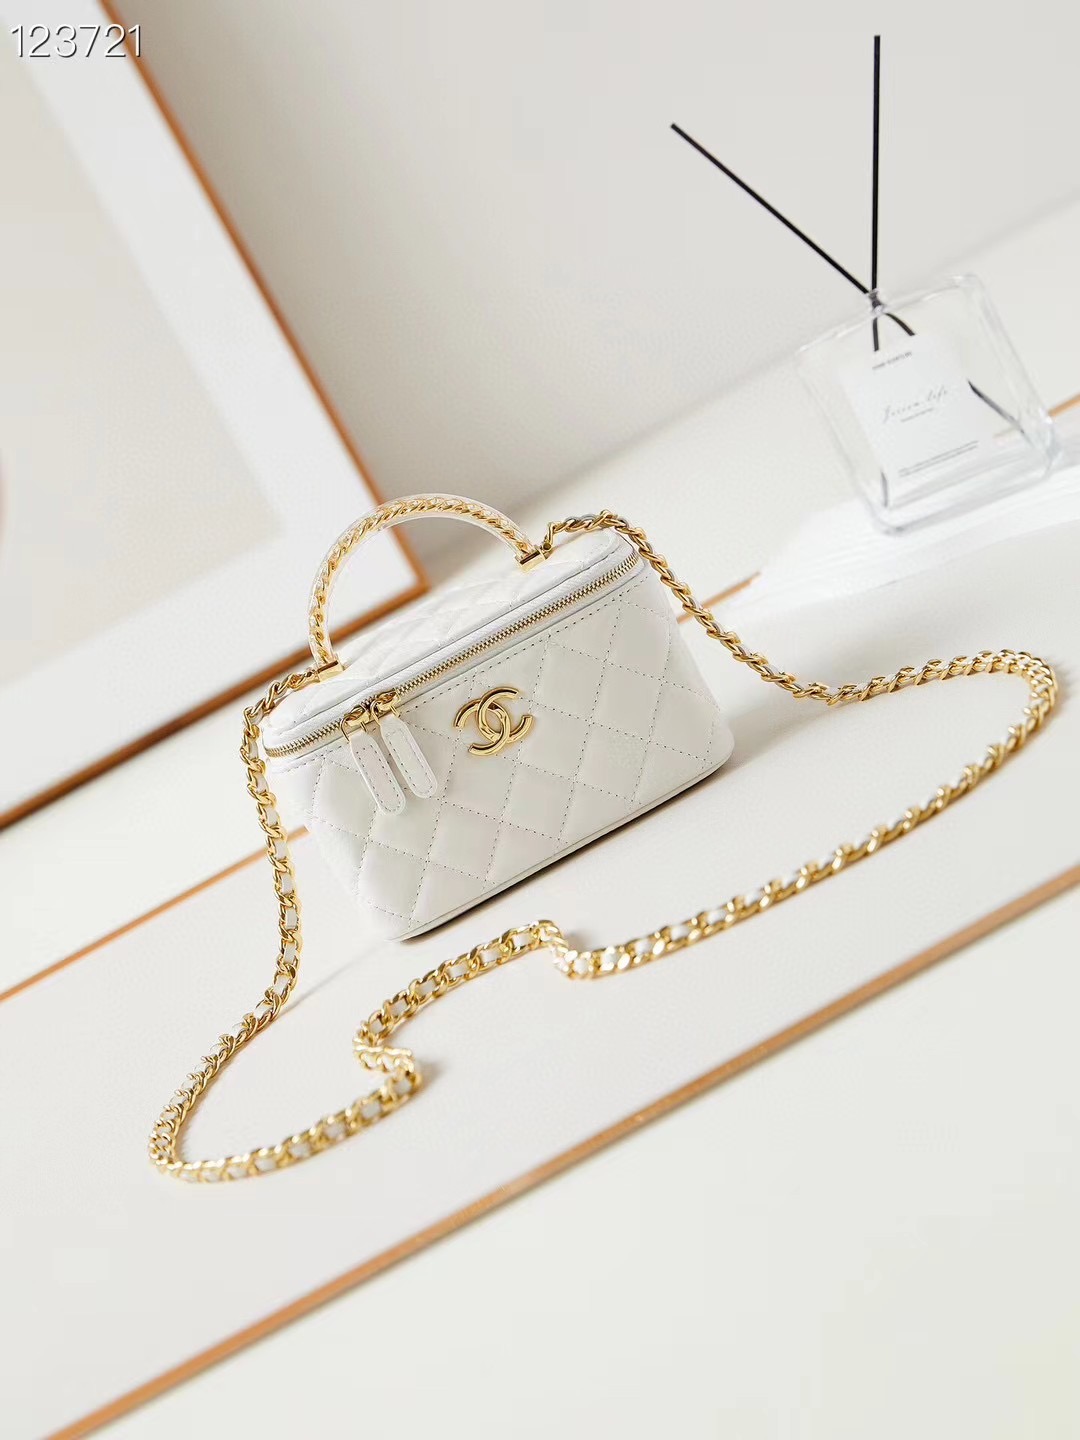 CHANEL MINI CLUTCH WITH TOP HANDLE AP3820 white